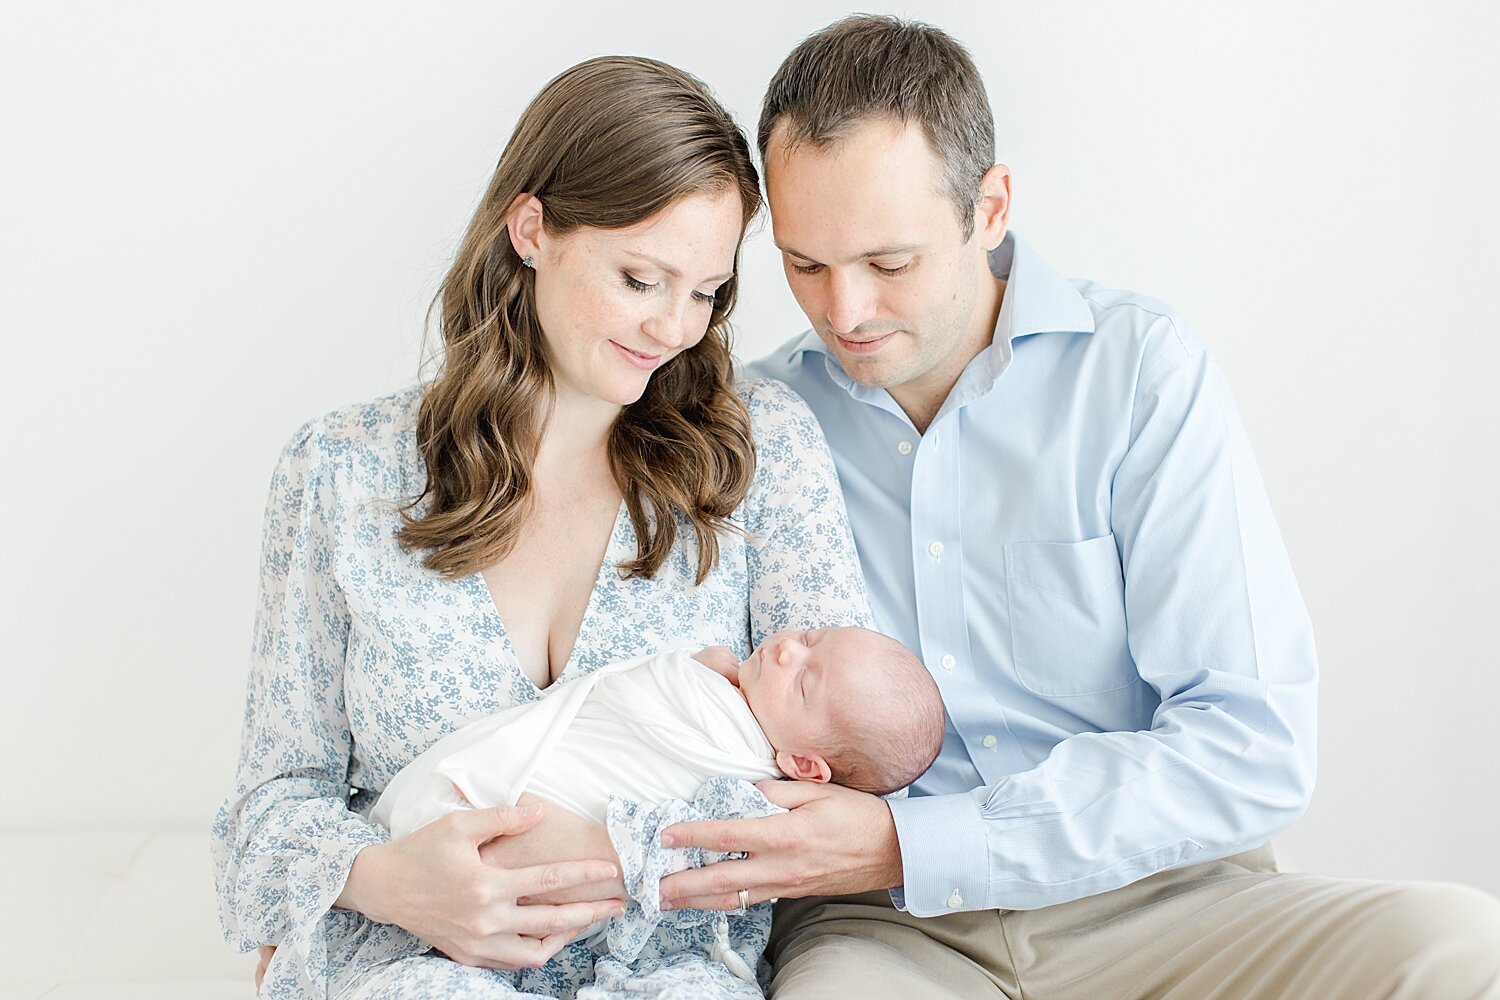 Newborn session in studio with first-time parents and baby boy. Photo by Kristin Wood Photography.